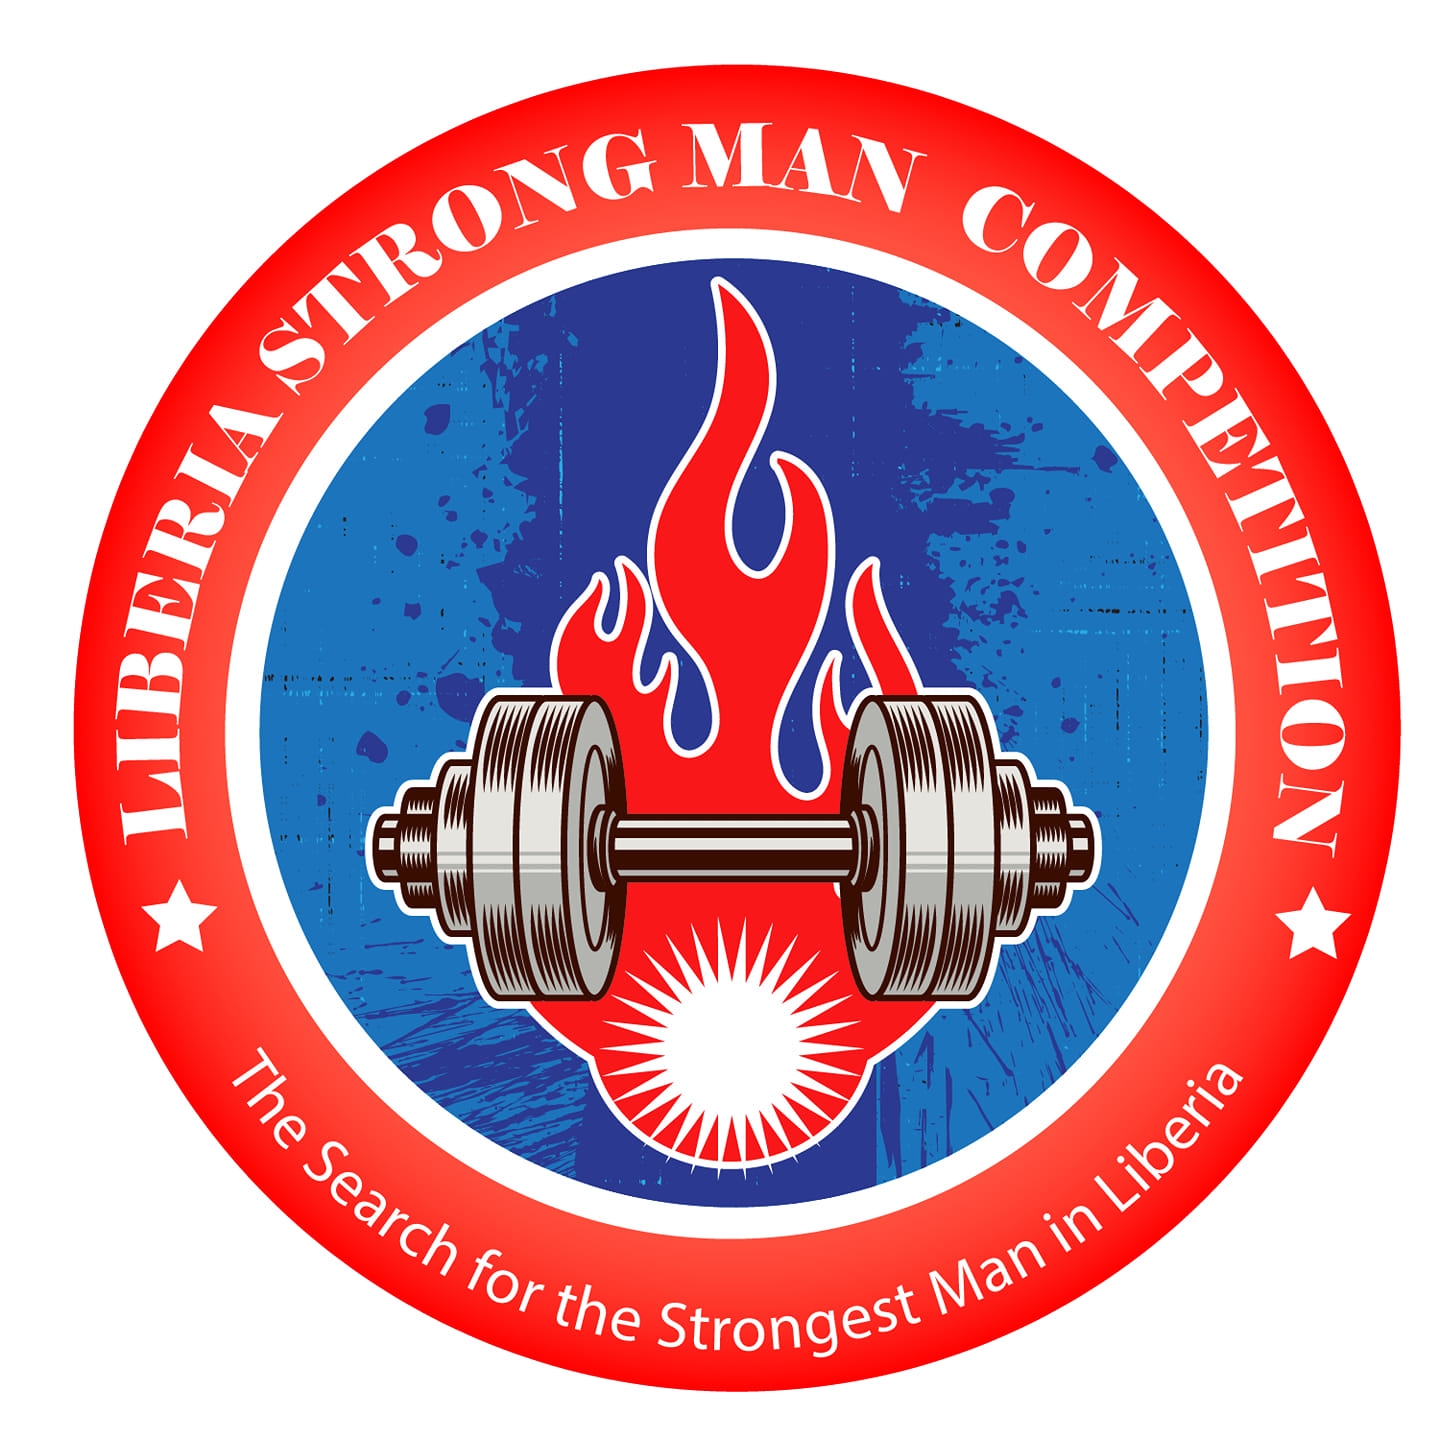 LIBERIA STRONGEST MAN COMPETITION LOGO